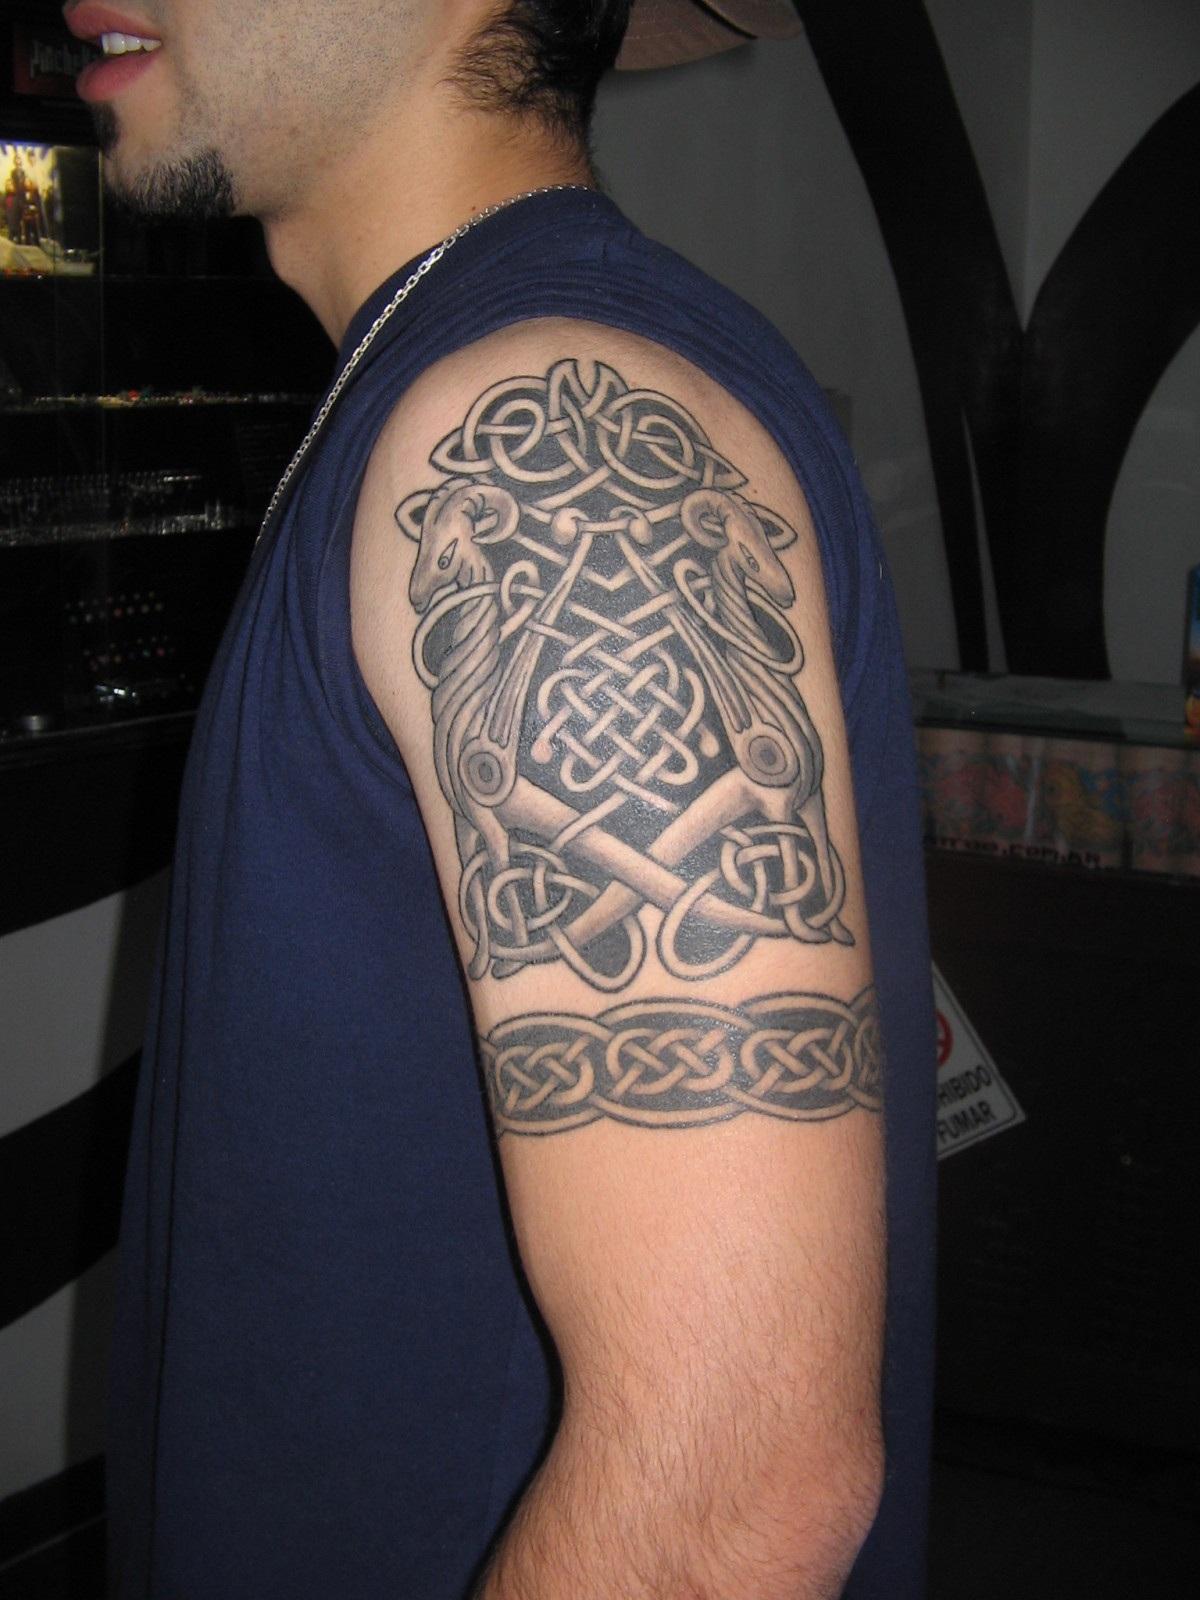 Arm Tattoos for Men| Arm Tattoo Designs Pictures Ideas